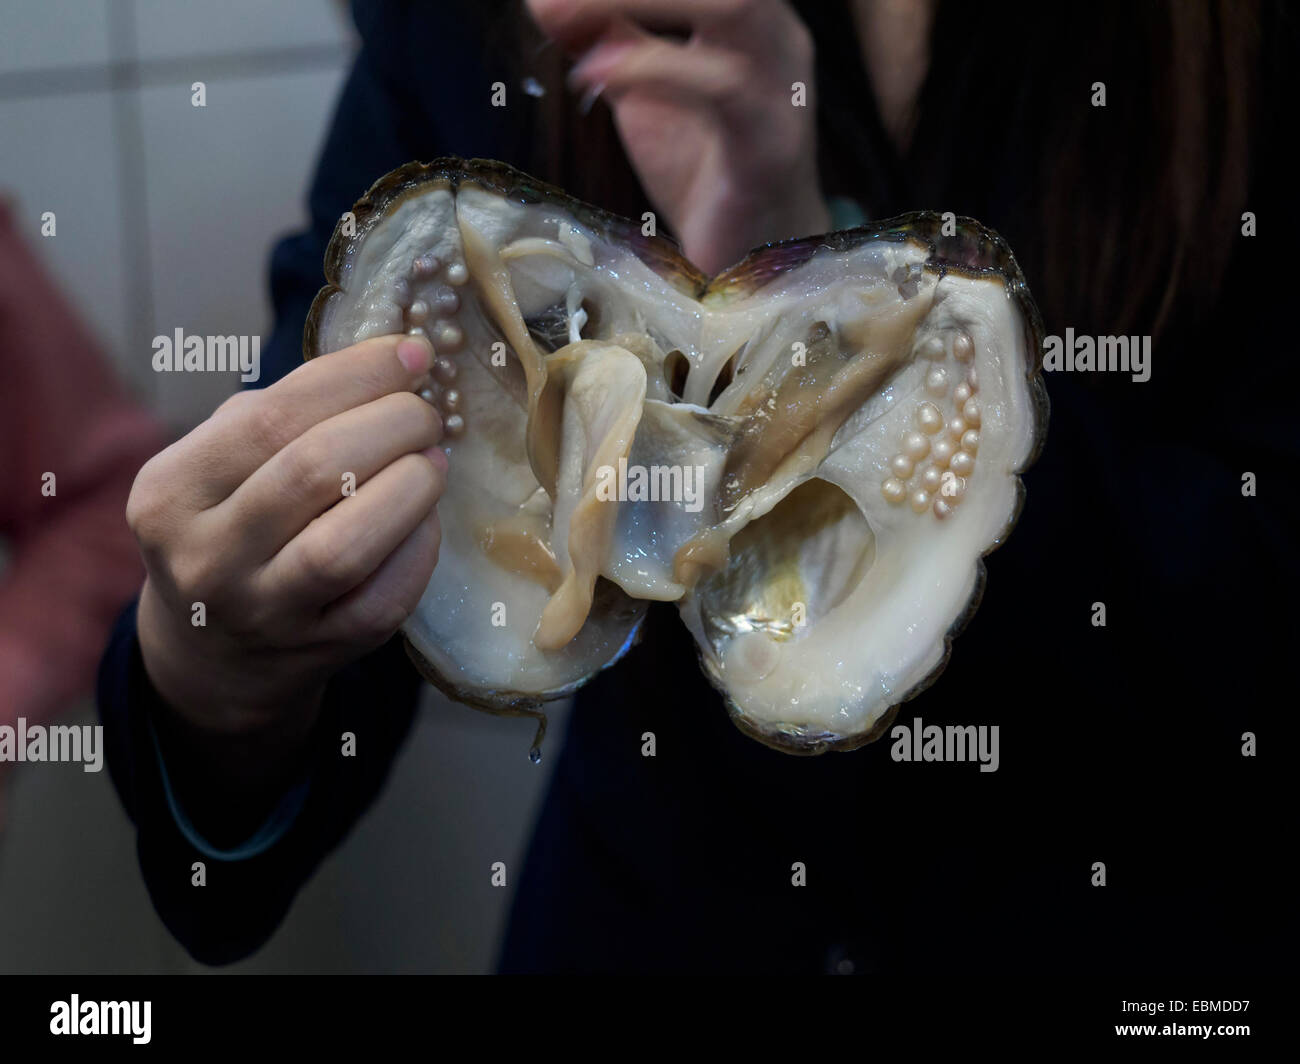 Woman holding an oyster full of pearls from a freshwater pearl farm Stock Photo